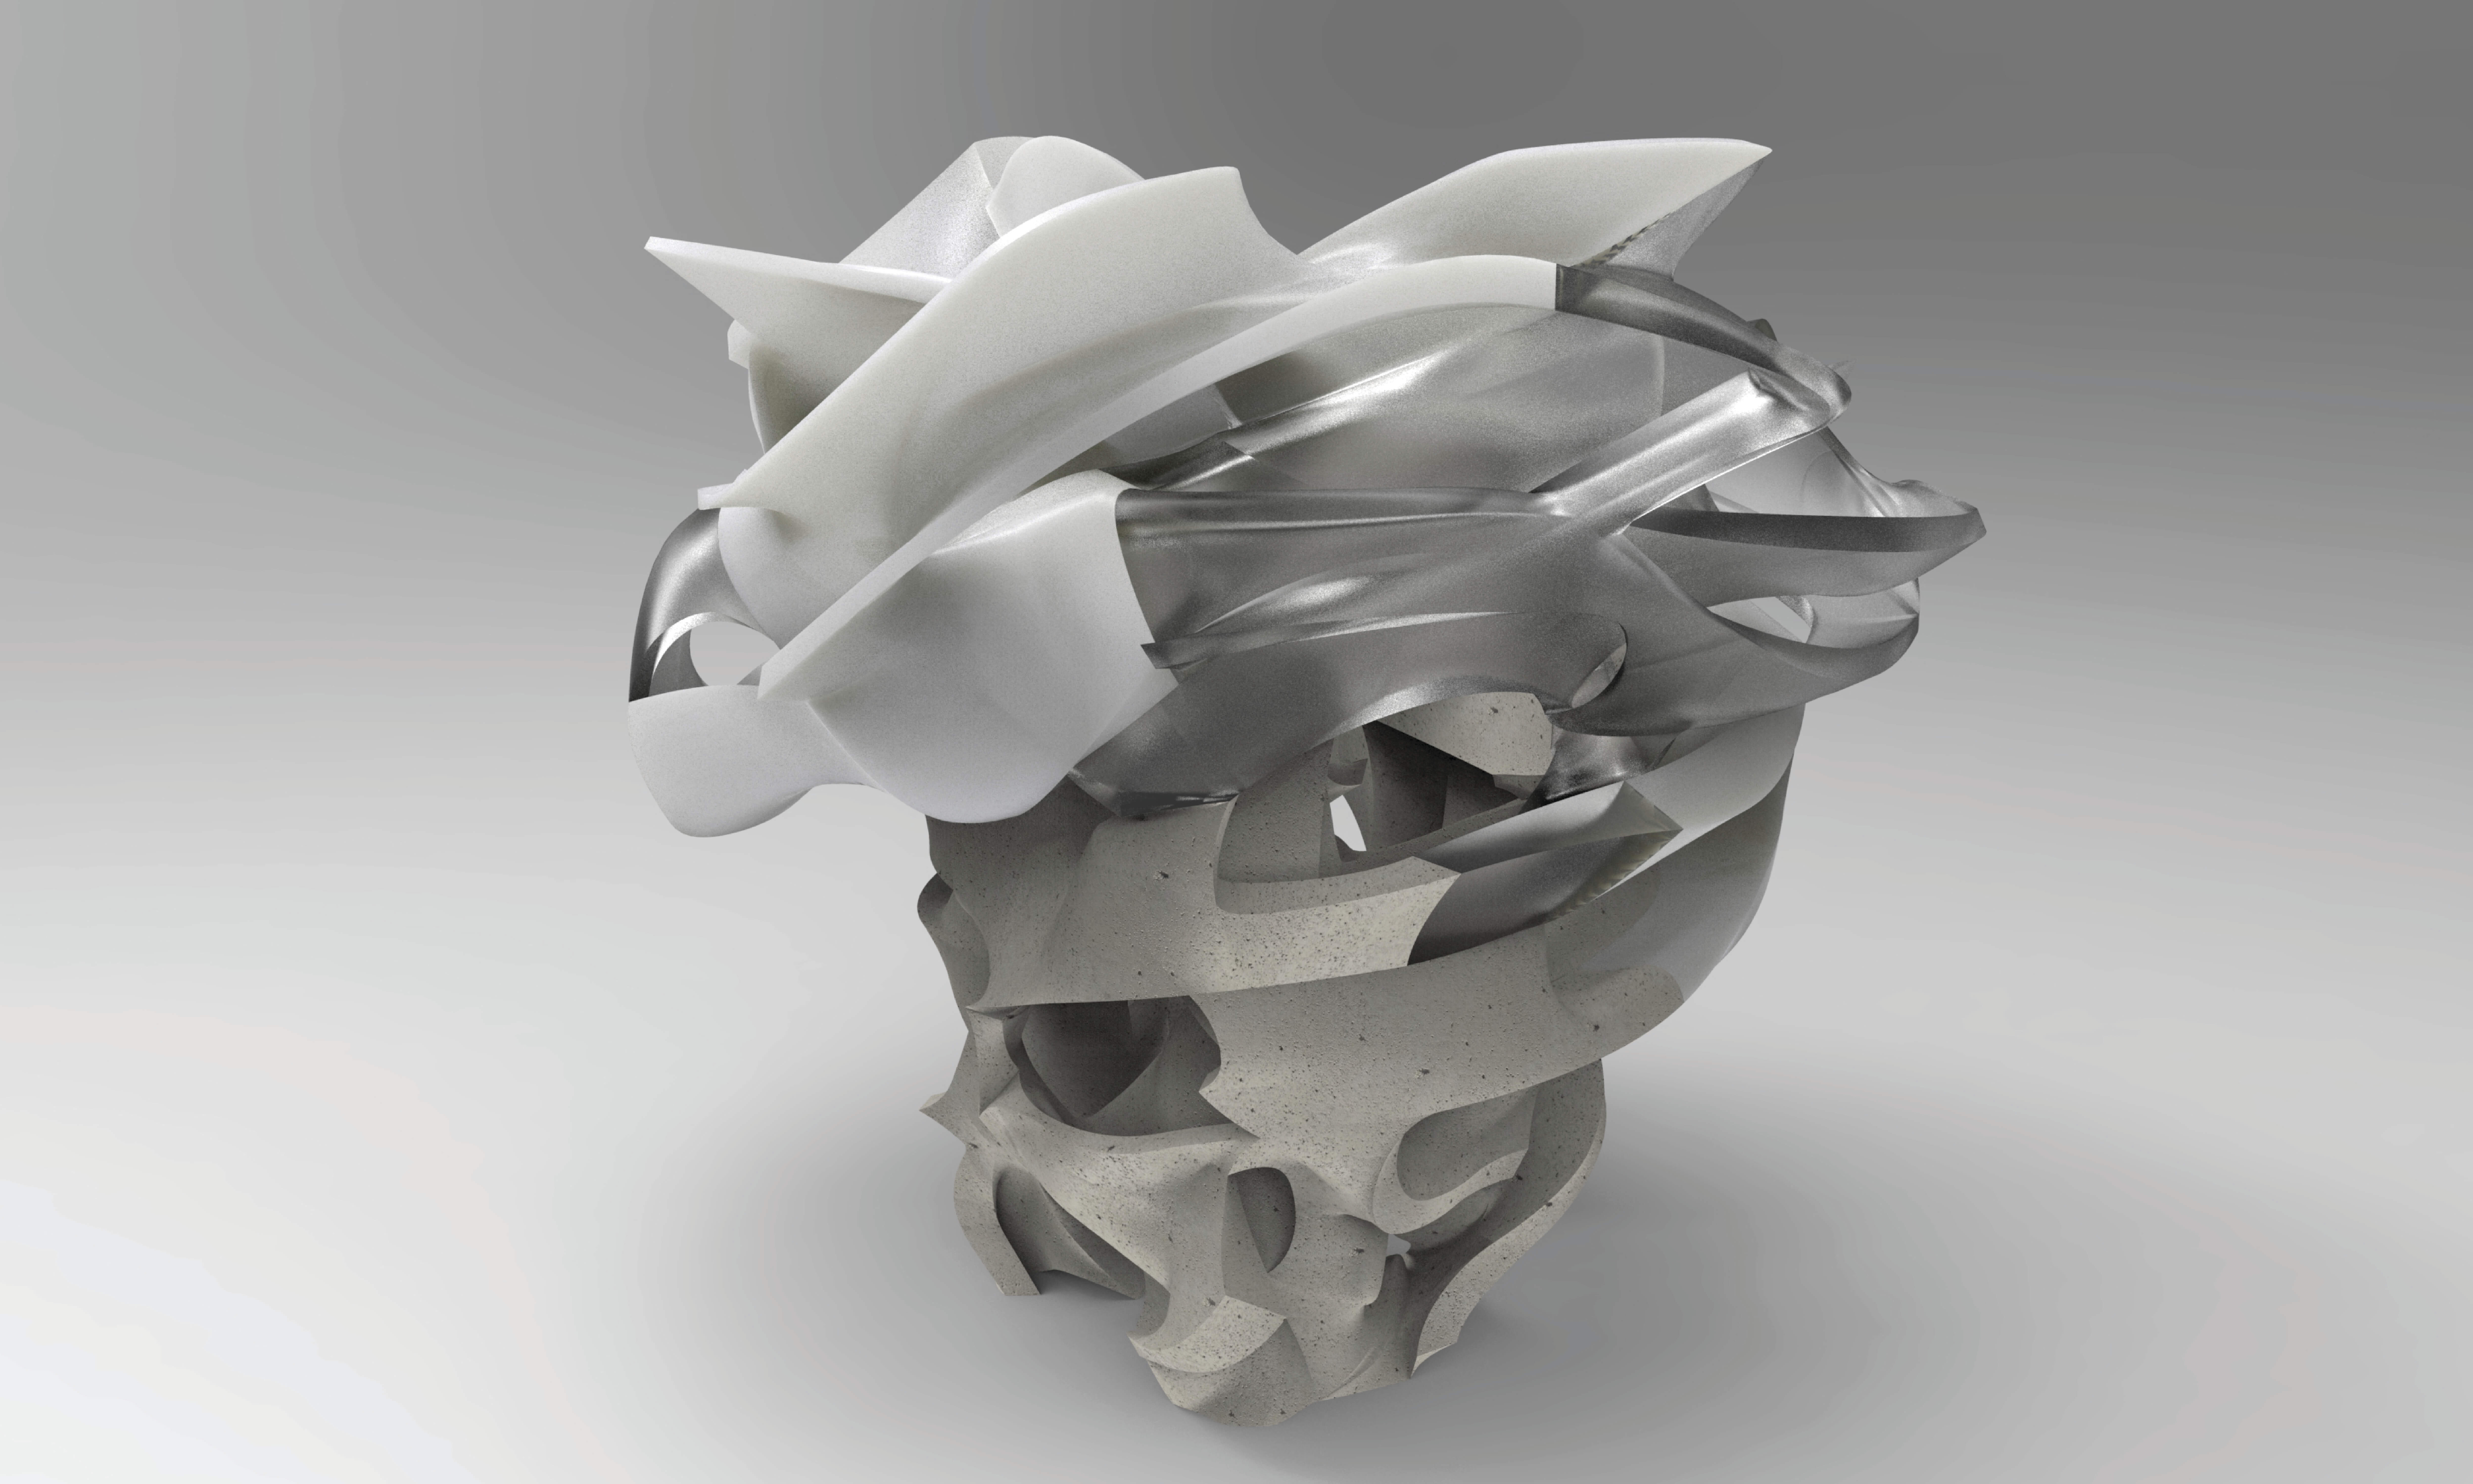 An abstract computer render of a morphologically complex shape in grey metallic hues. Somewhat resembles a tornado.